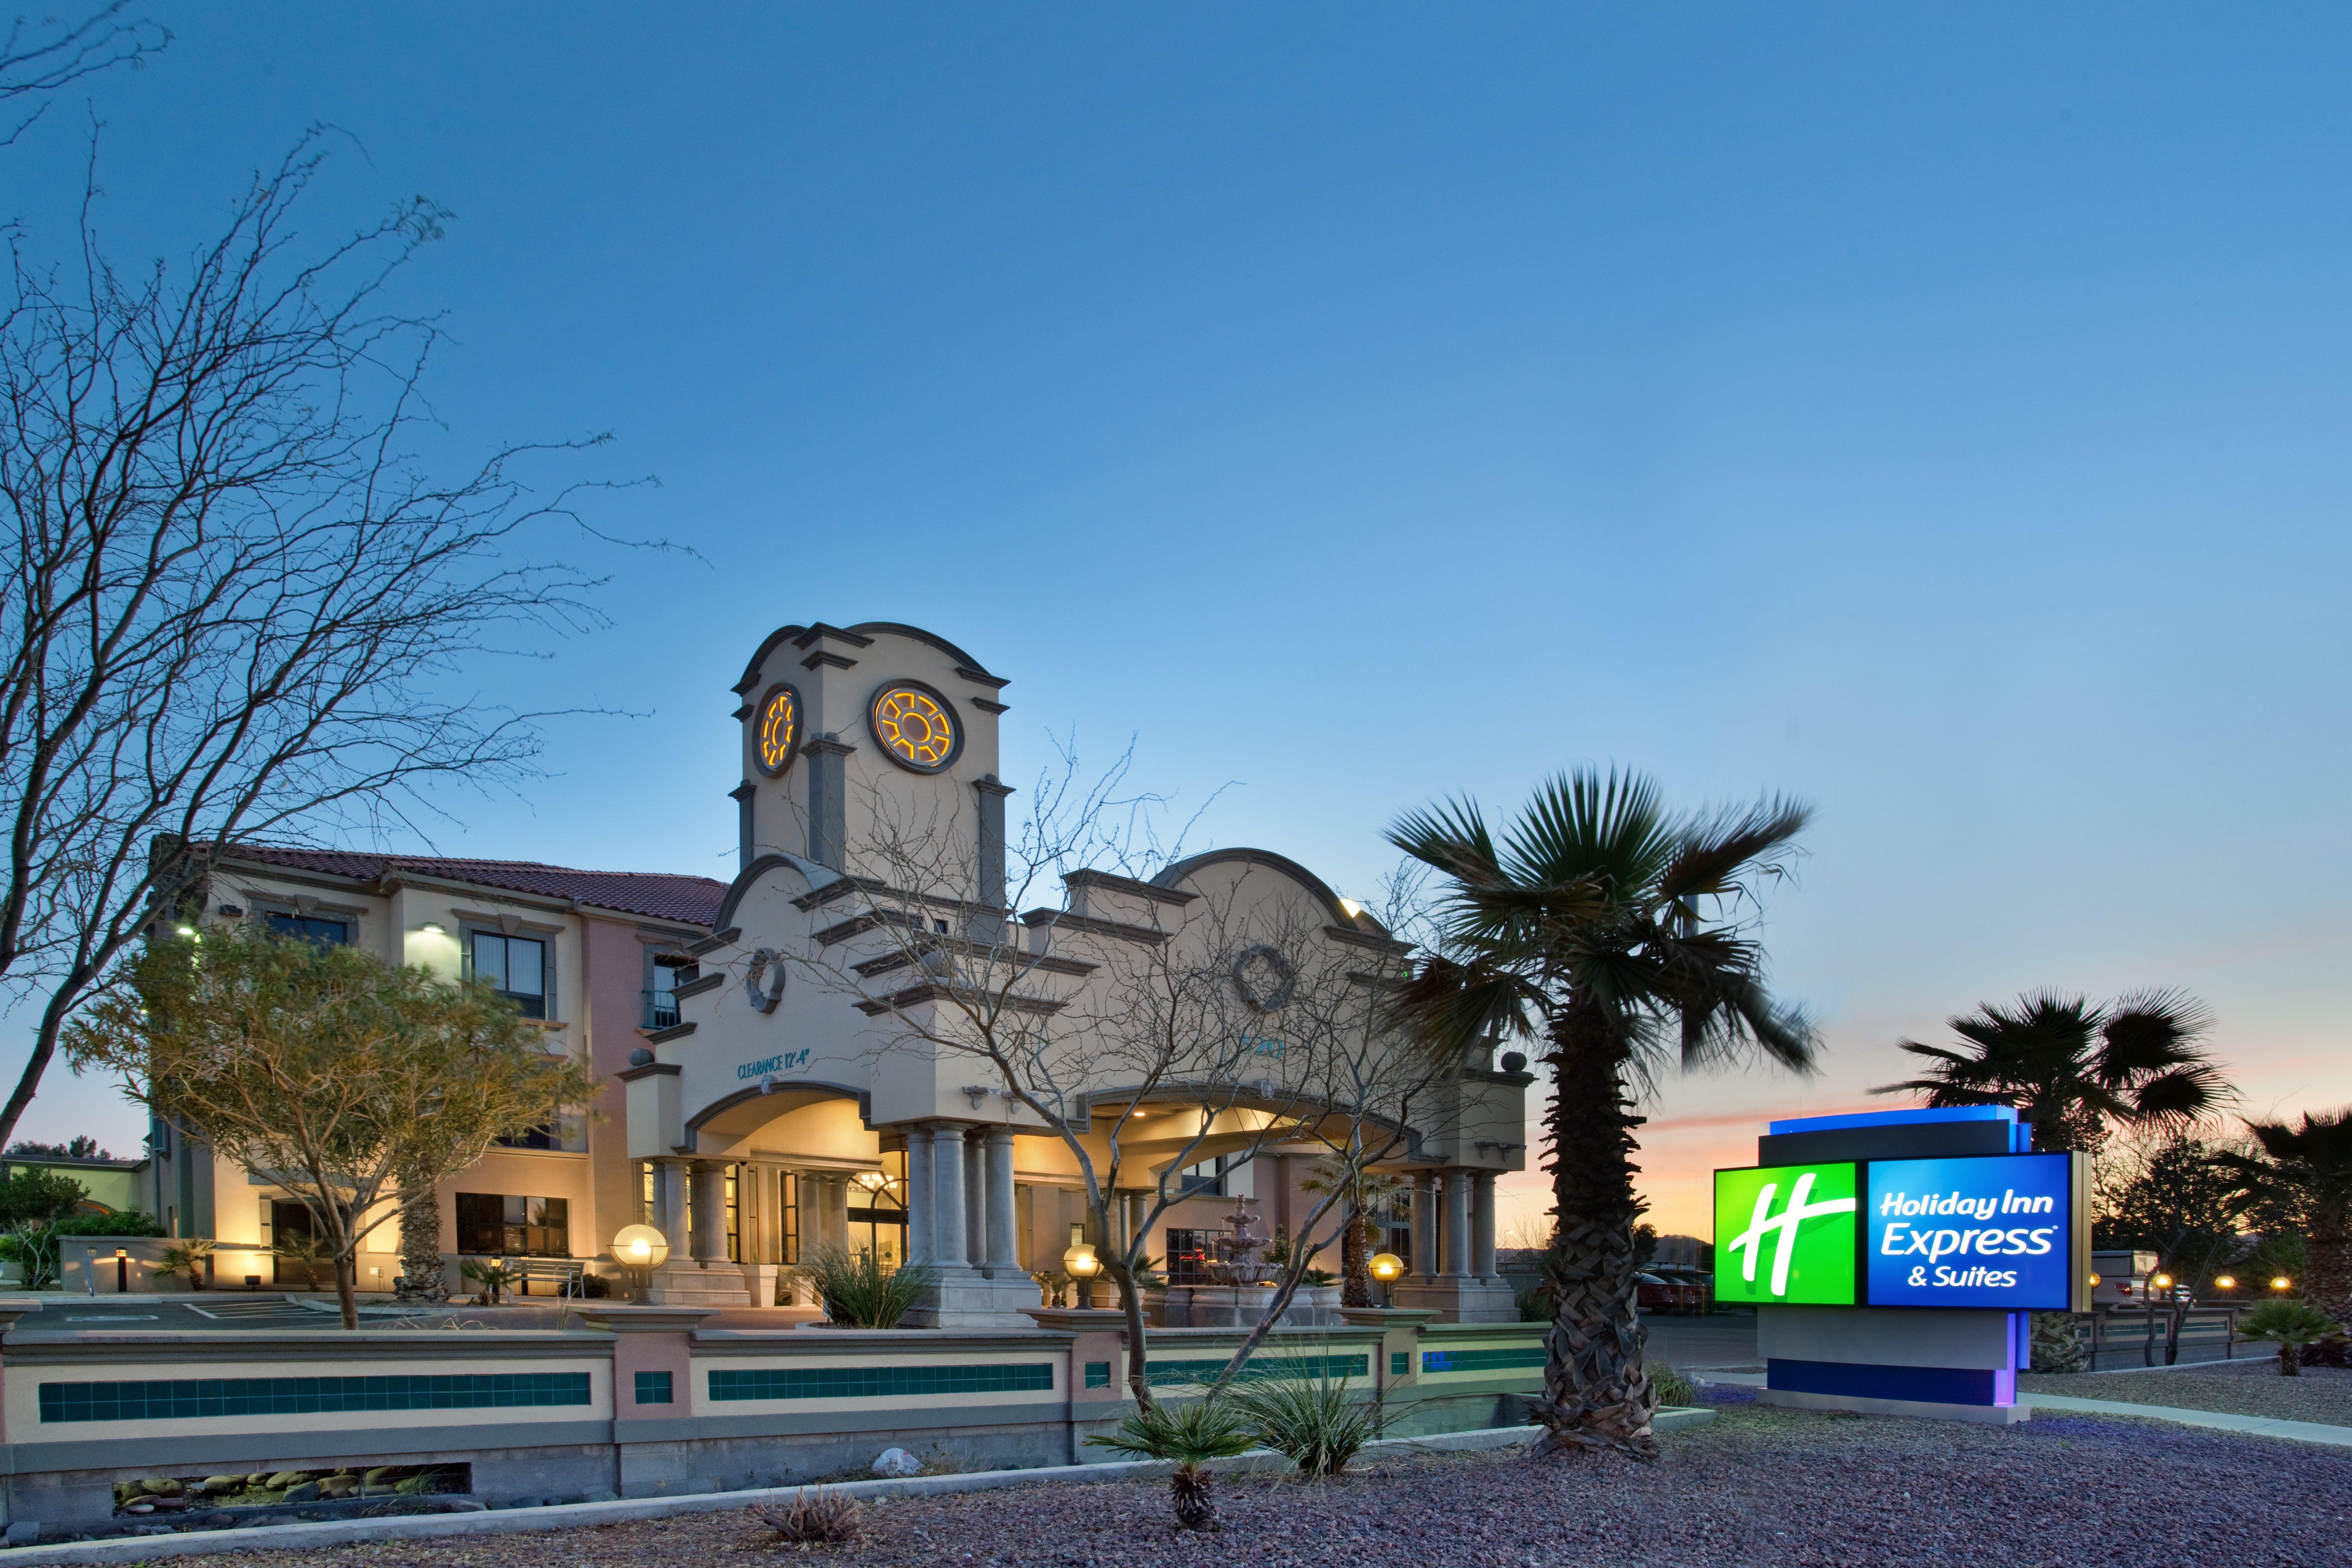 Come and enjoy a stay at Holiday Inn Express & Suites Tucson Mall!